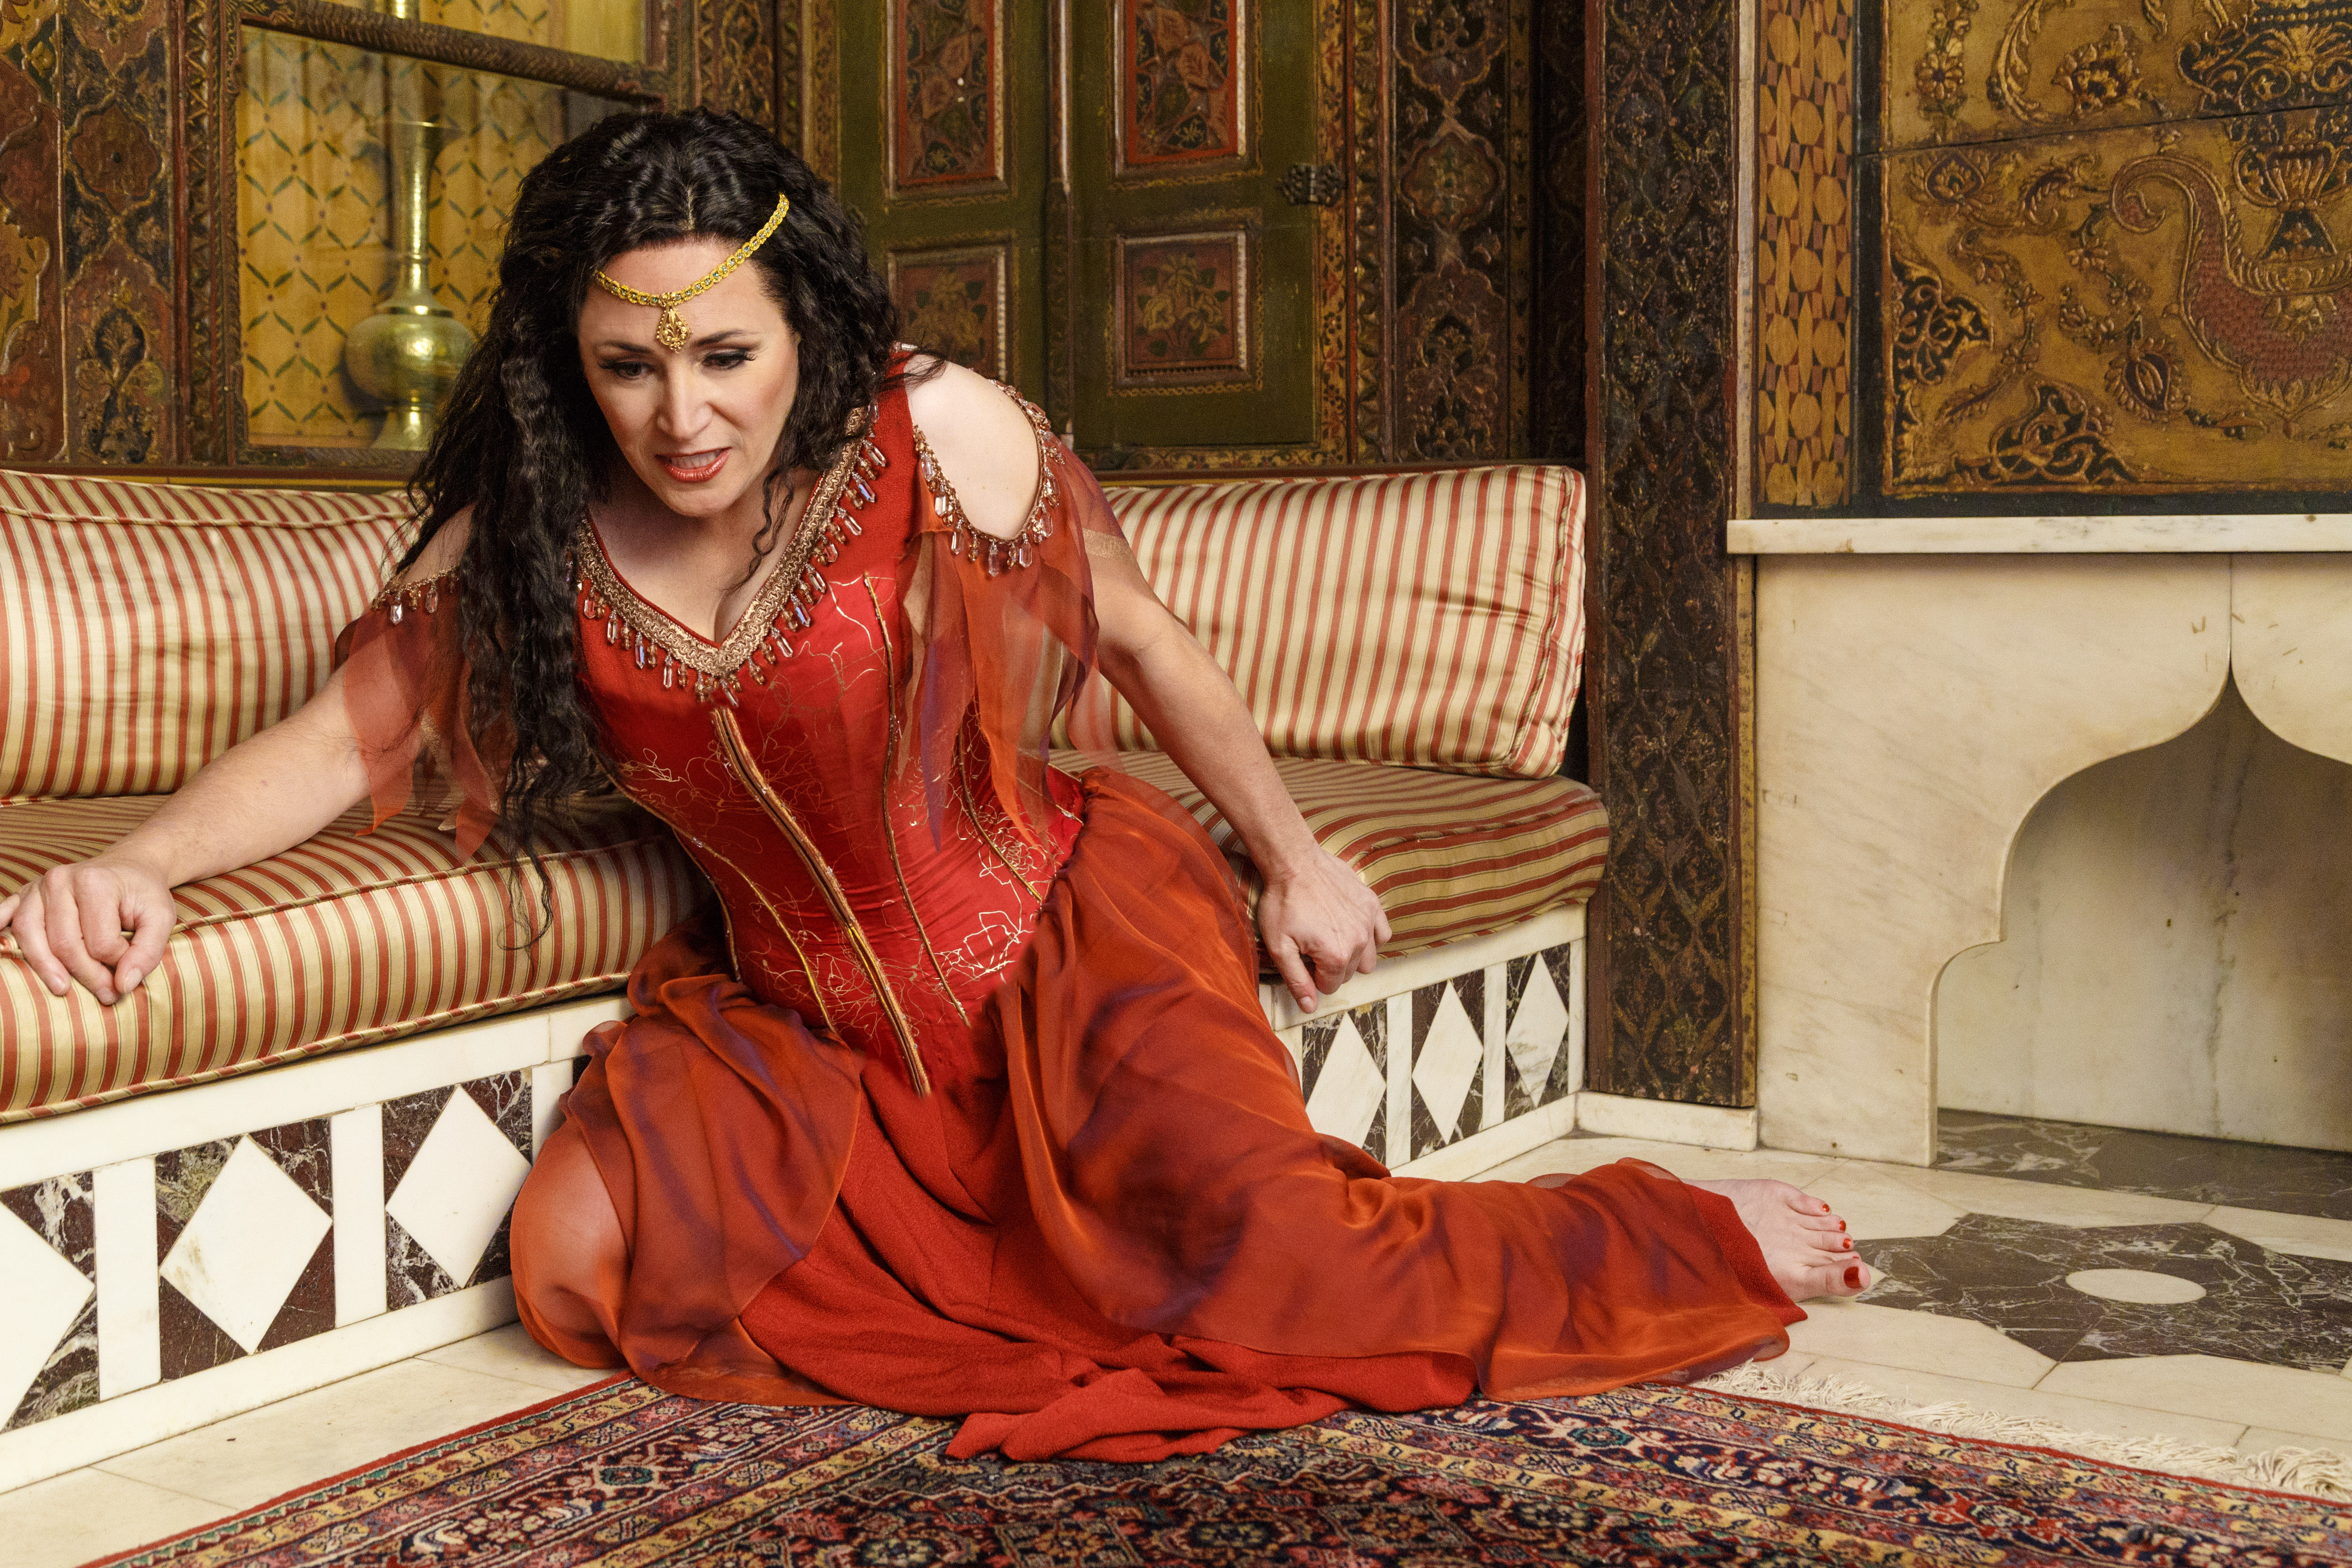 Femme fatale: soprano Patricia Raceme is a steaming Salome in Strauss's opera, one of many classics on Pittsburgh stages in this year's 11th month.